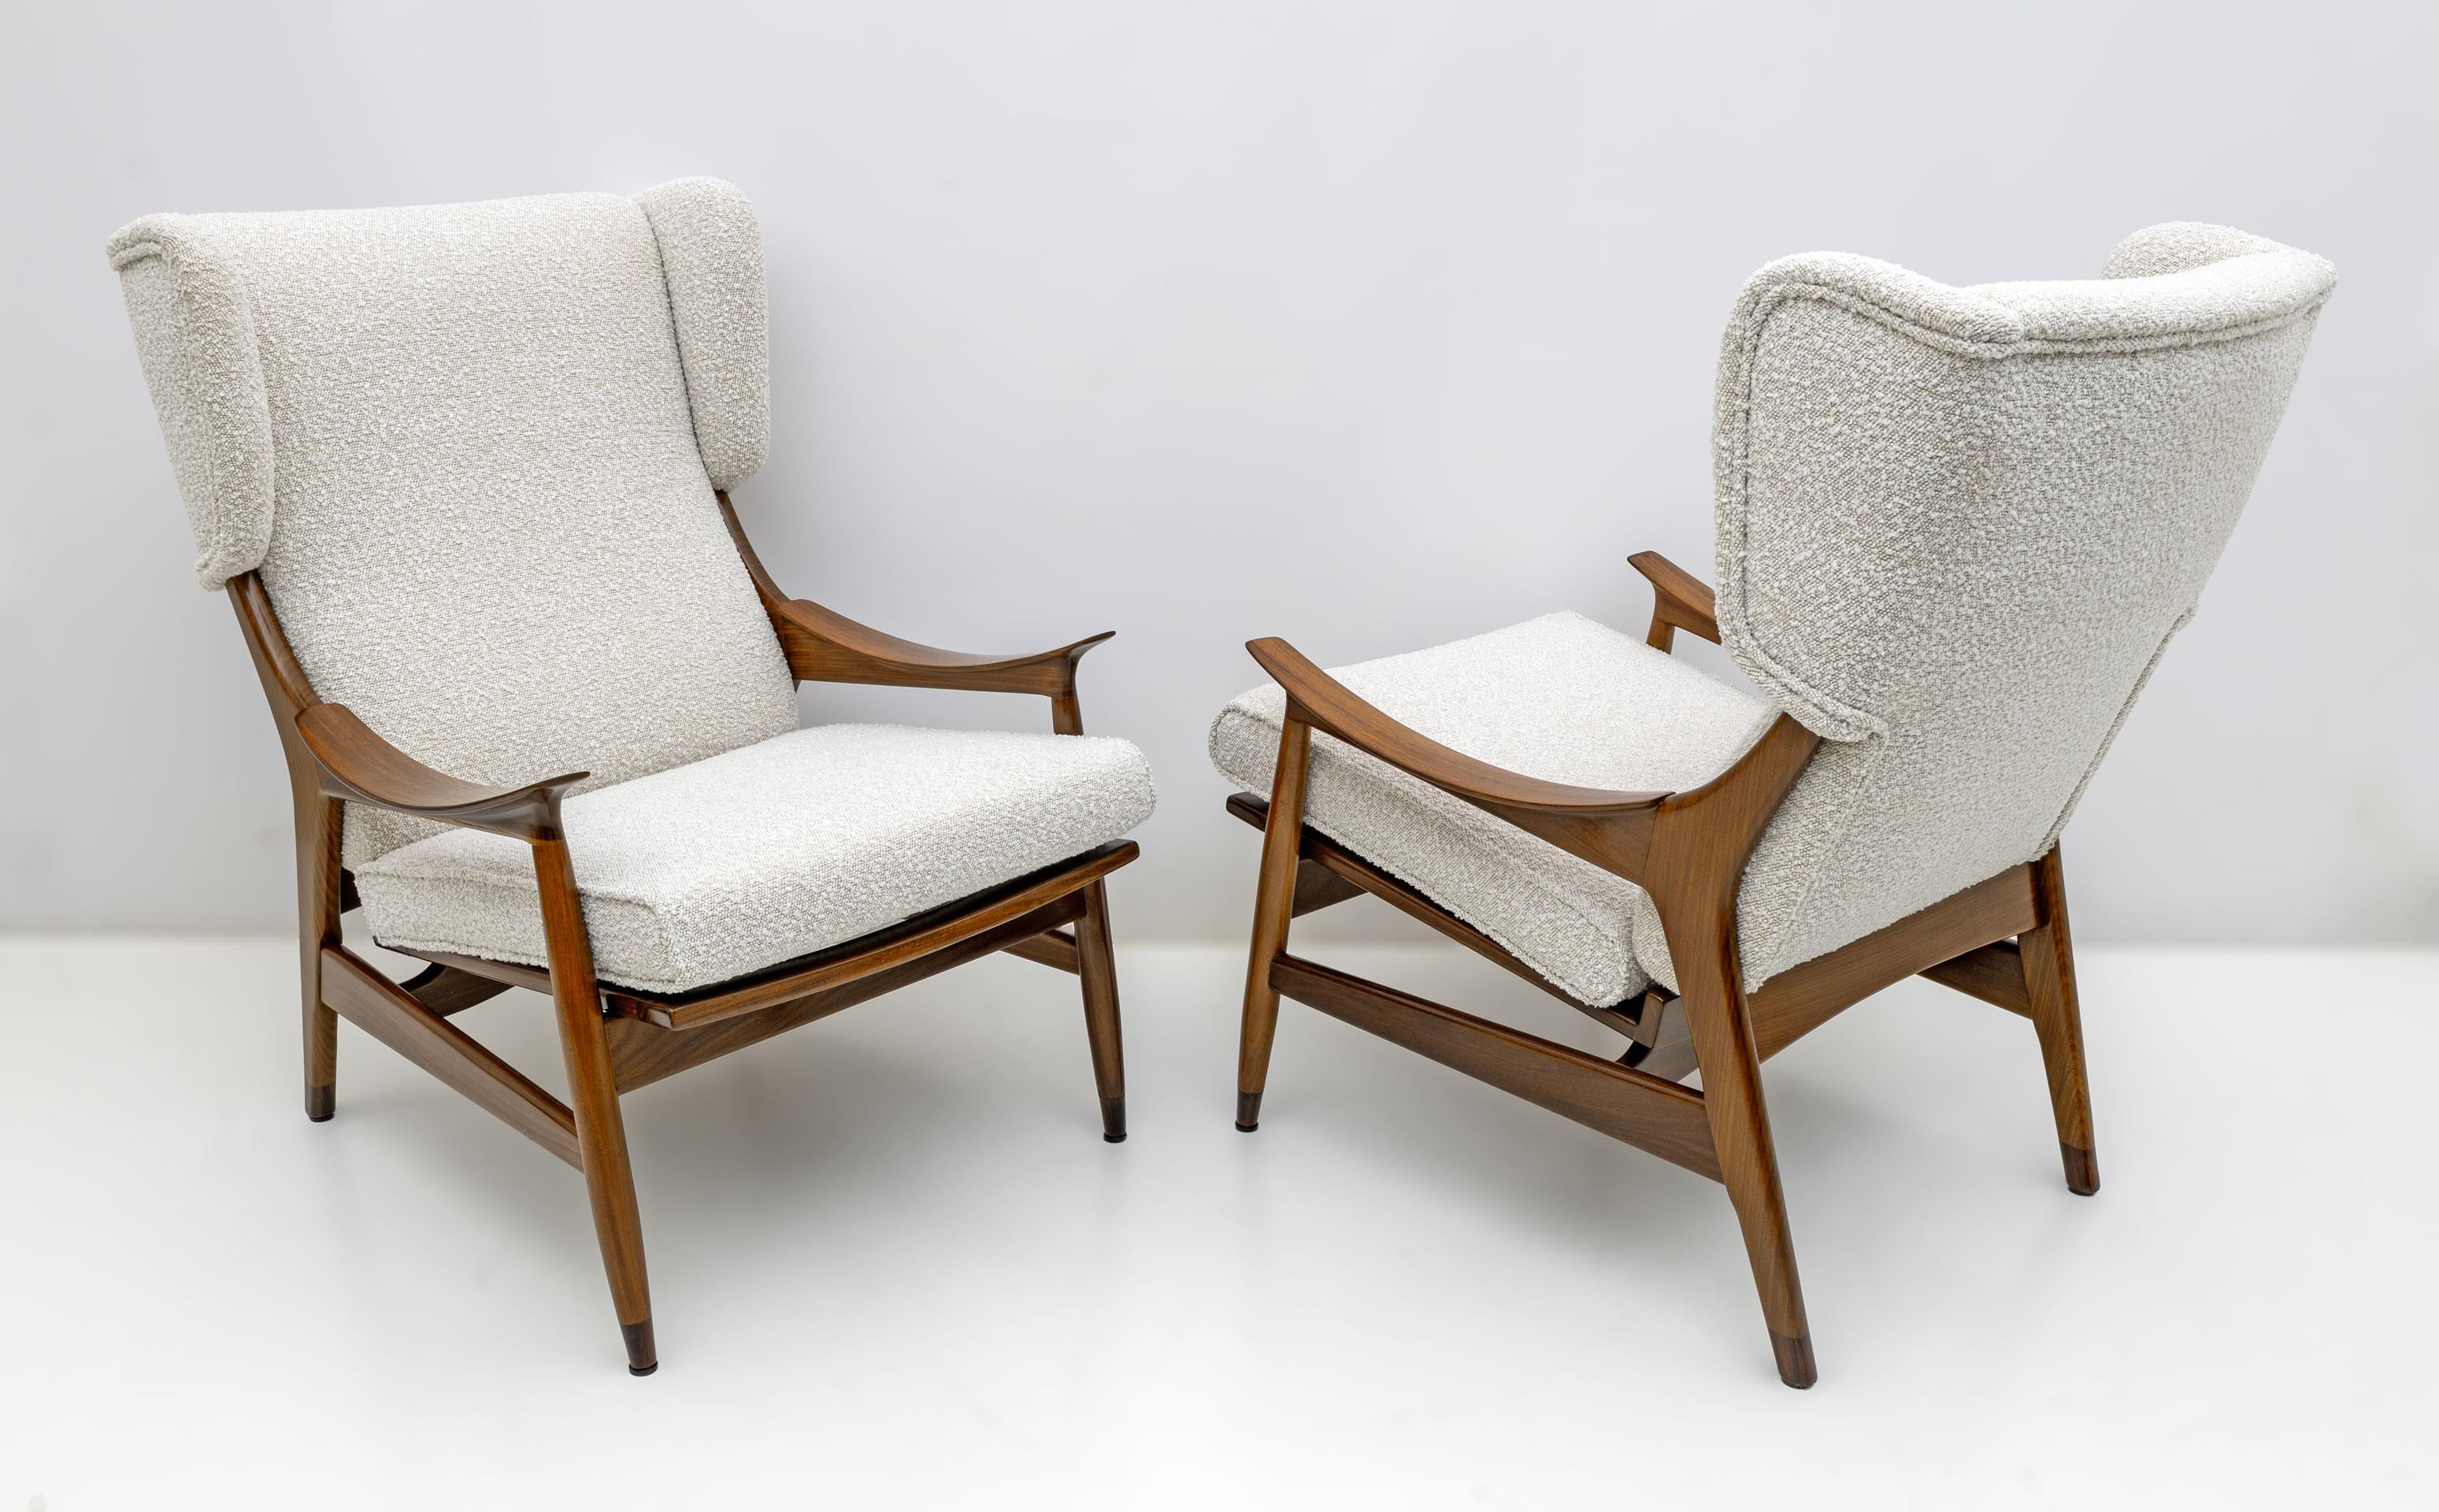 Produced in Italy in the 1950s by the Framar company (Fratelli Marelli), this pair of spectacular lounge chairs! With its lightweight rosewood frame, understated wing-back top and swooping armrests, these lounge chairs represent the best of elegant